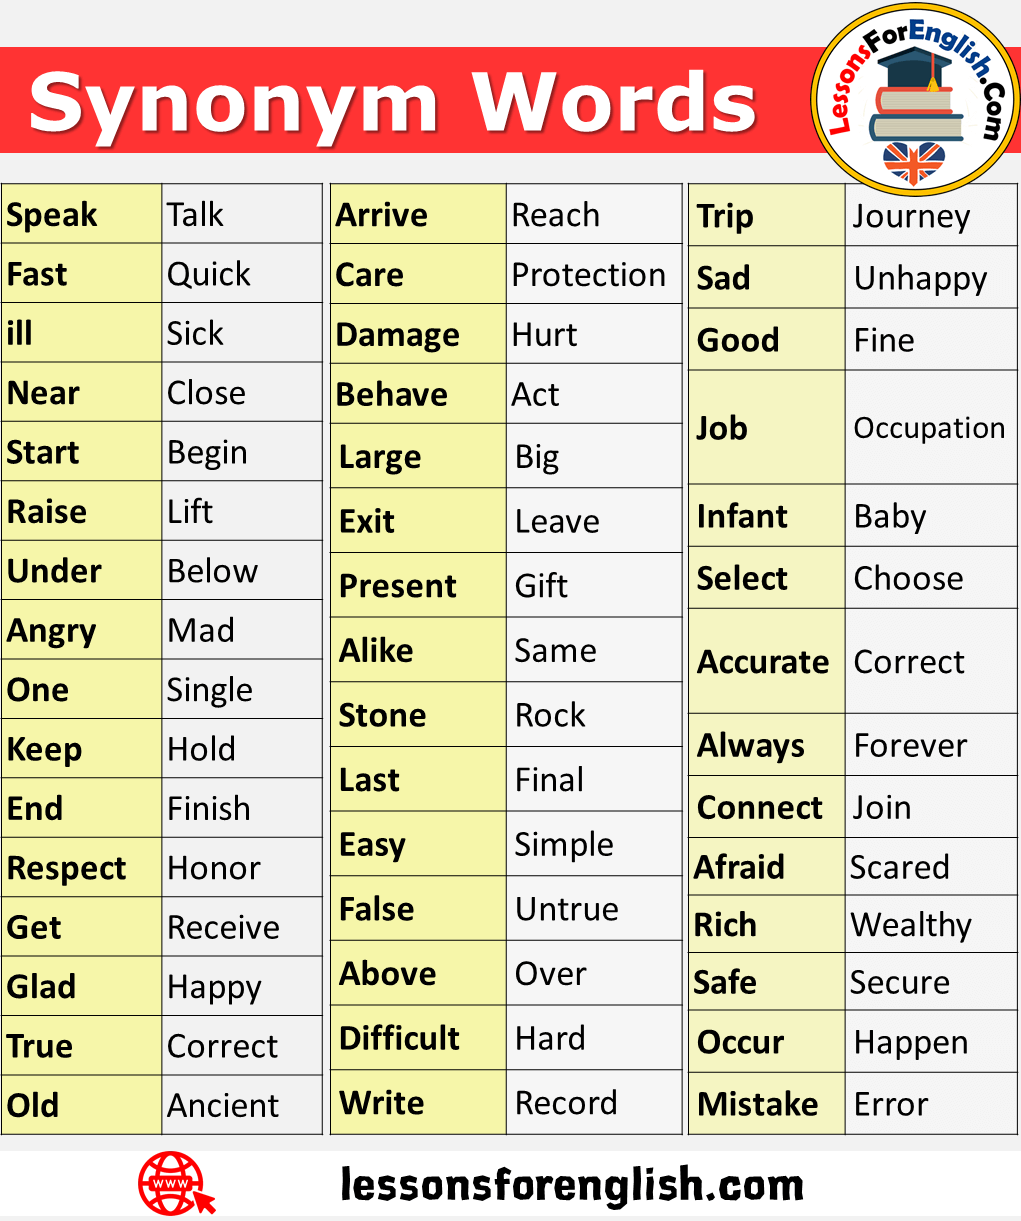 48 Synonym Words List In English - Lessons For English